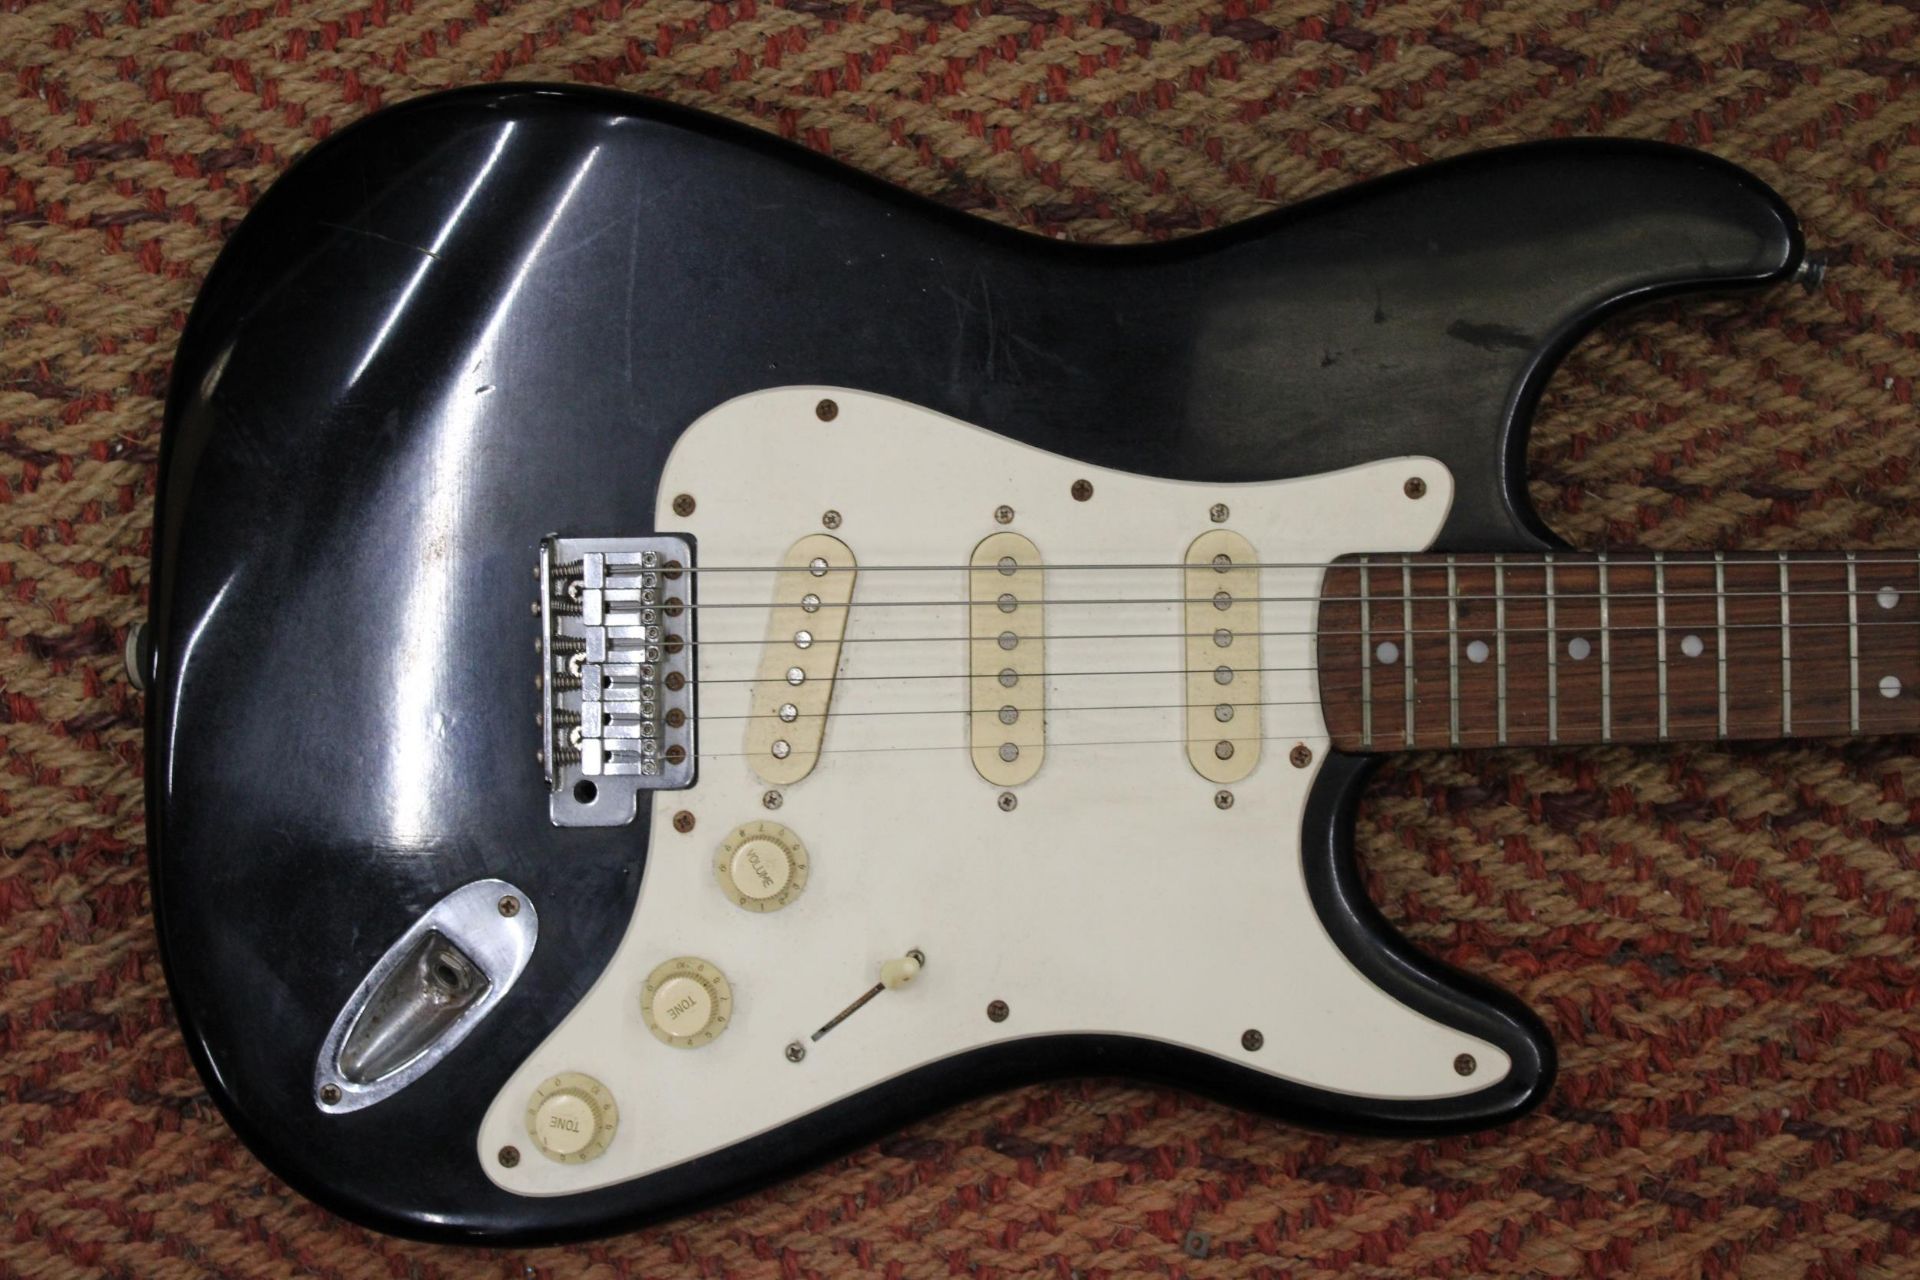 AN ENCORE BLACK STRATOCASTER ELECTRIC GUITAR - Image 4 of 6